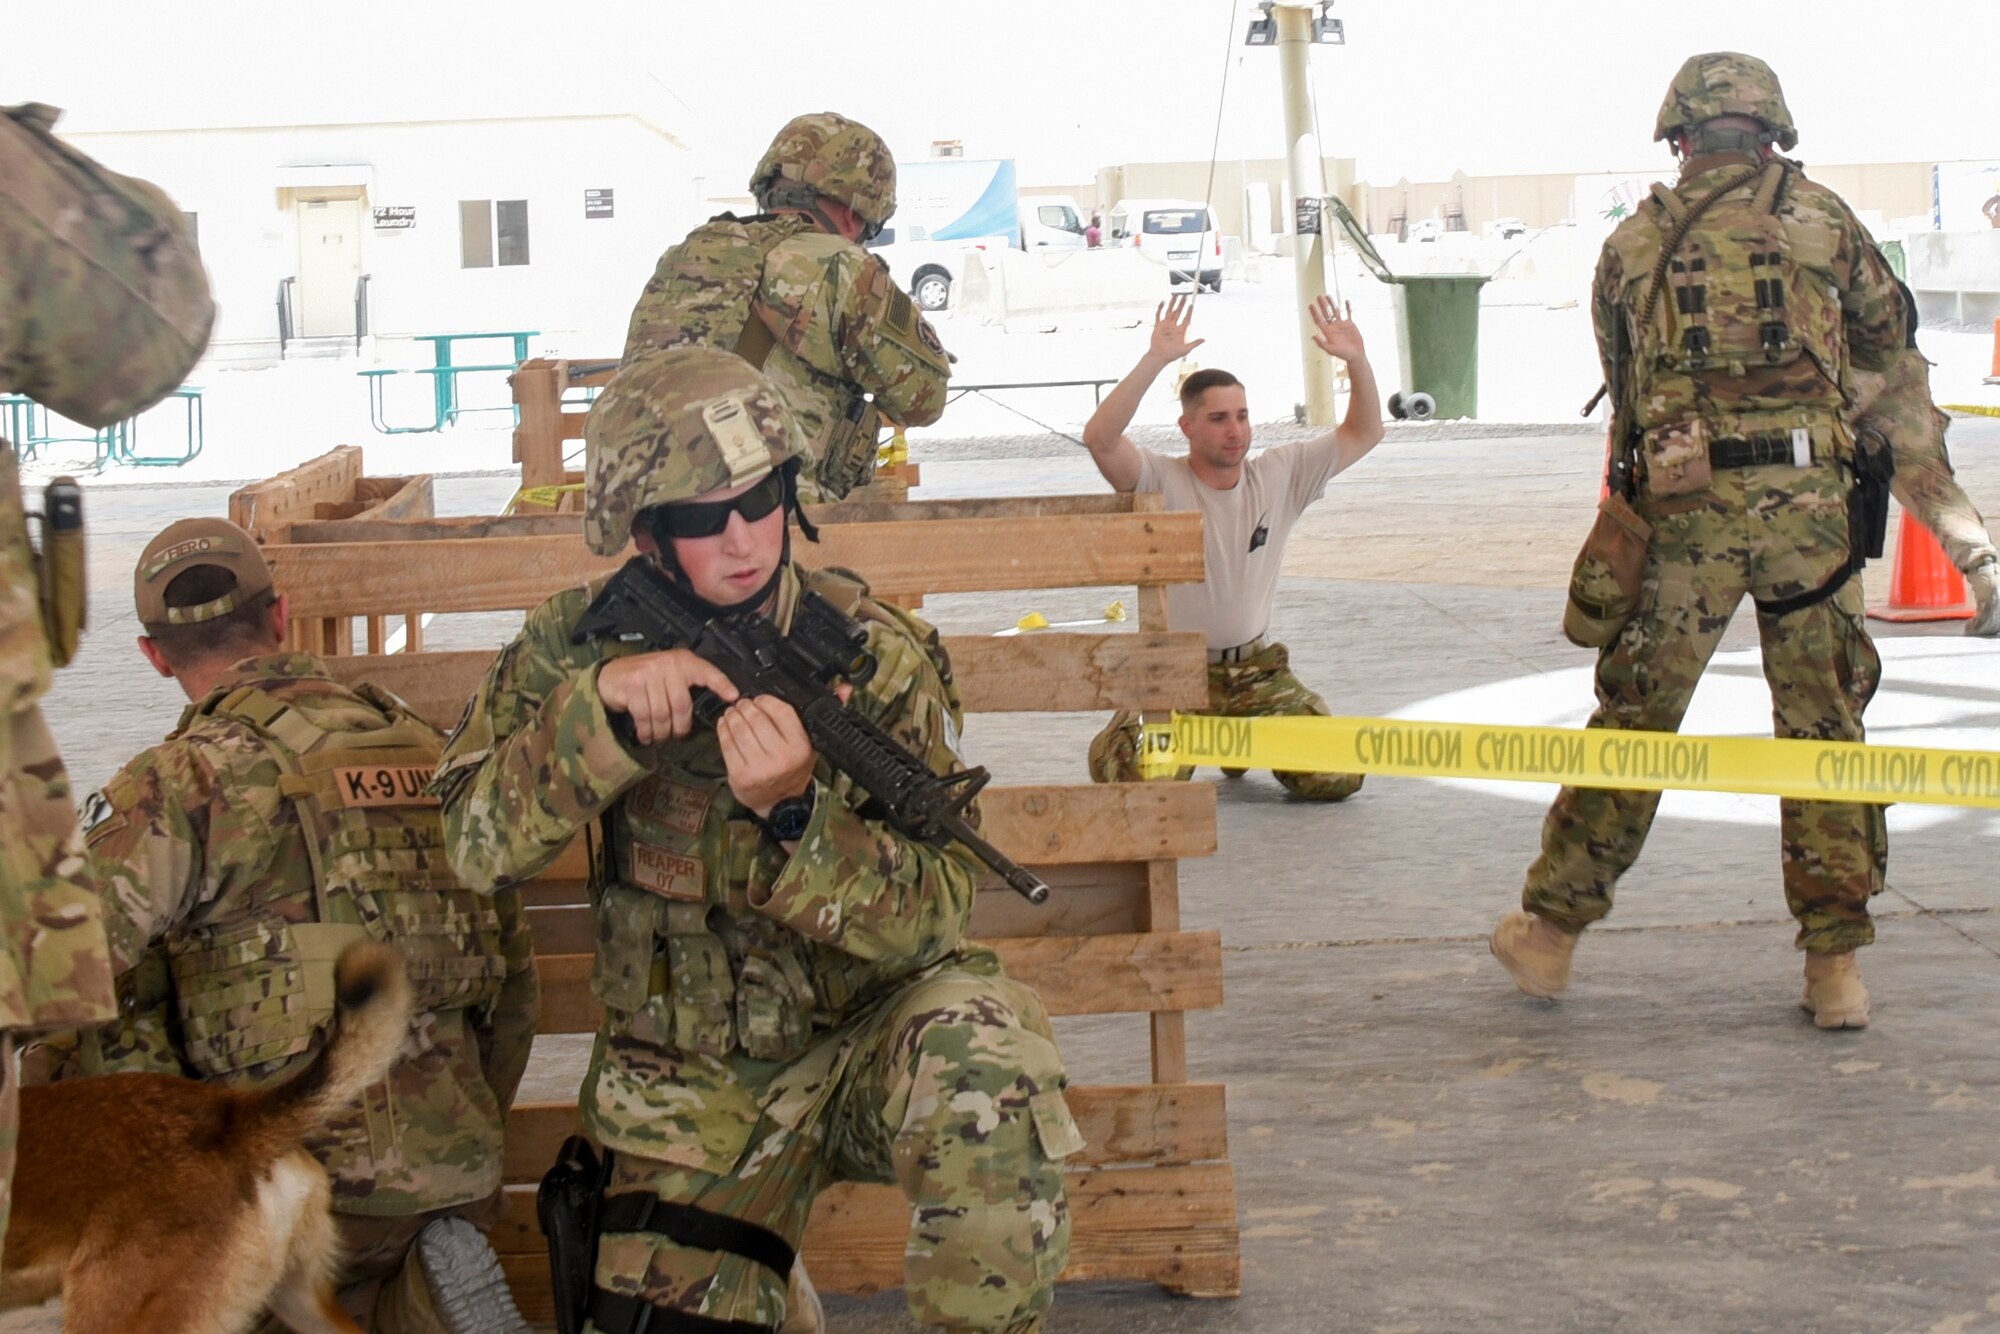 Members of the 379th Expeditionary Security Forces Squadron demonstrate room clearing procedures during National Police Week at Al Udeid Air Base, Qatar, May 16, 2018. Throughout the week, security forces members held numerous events to highlight capabilities and competencies of the squadron. (U.S. Air Force photo by Staff Sgt. Enjoli Saunders)